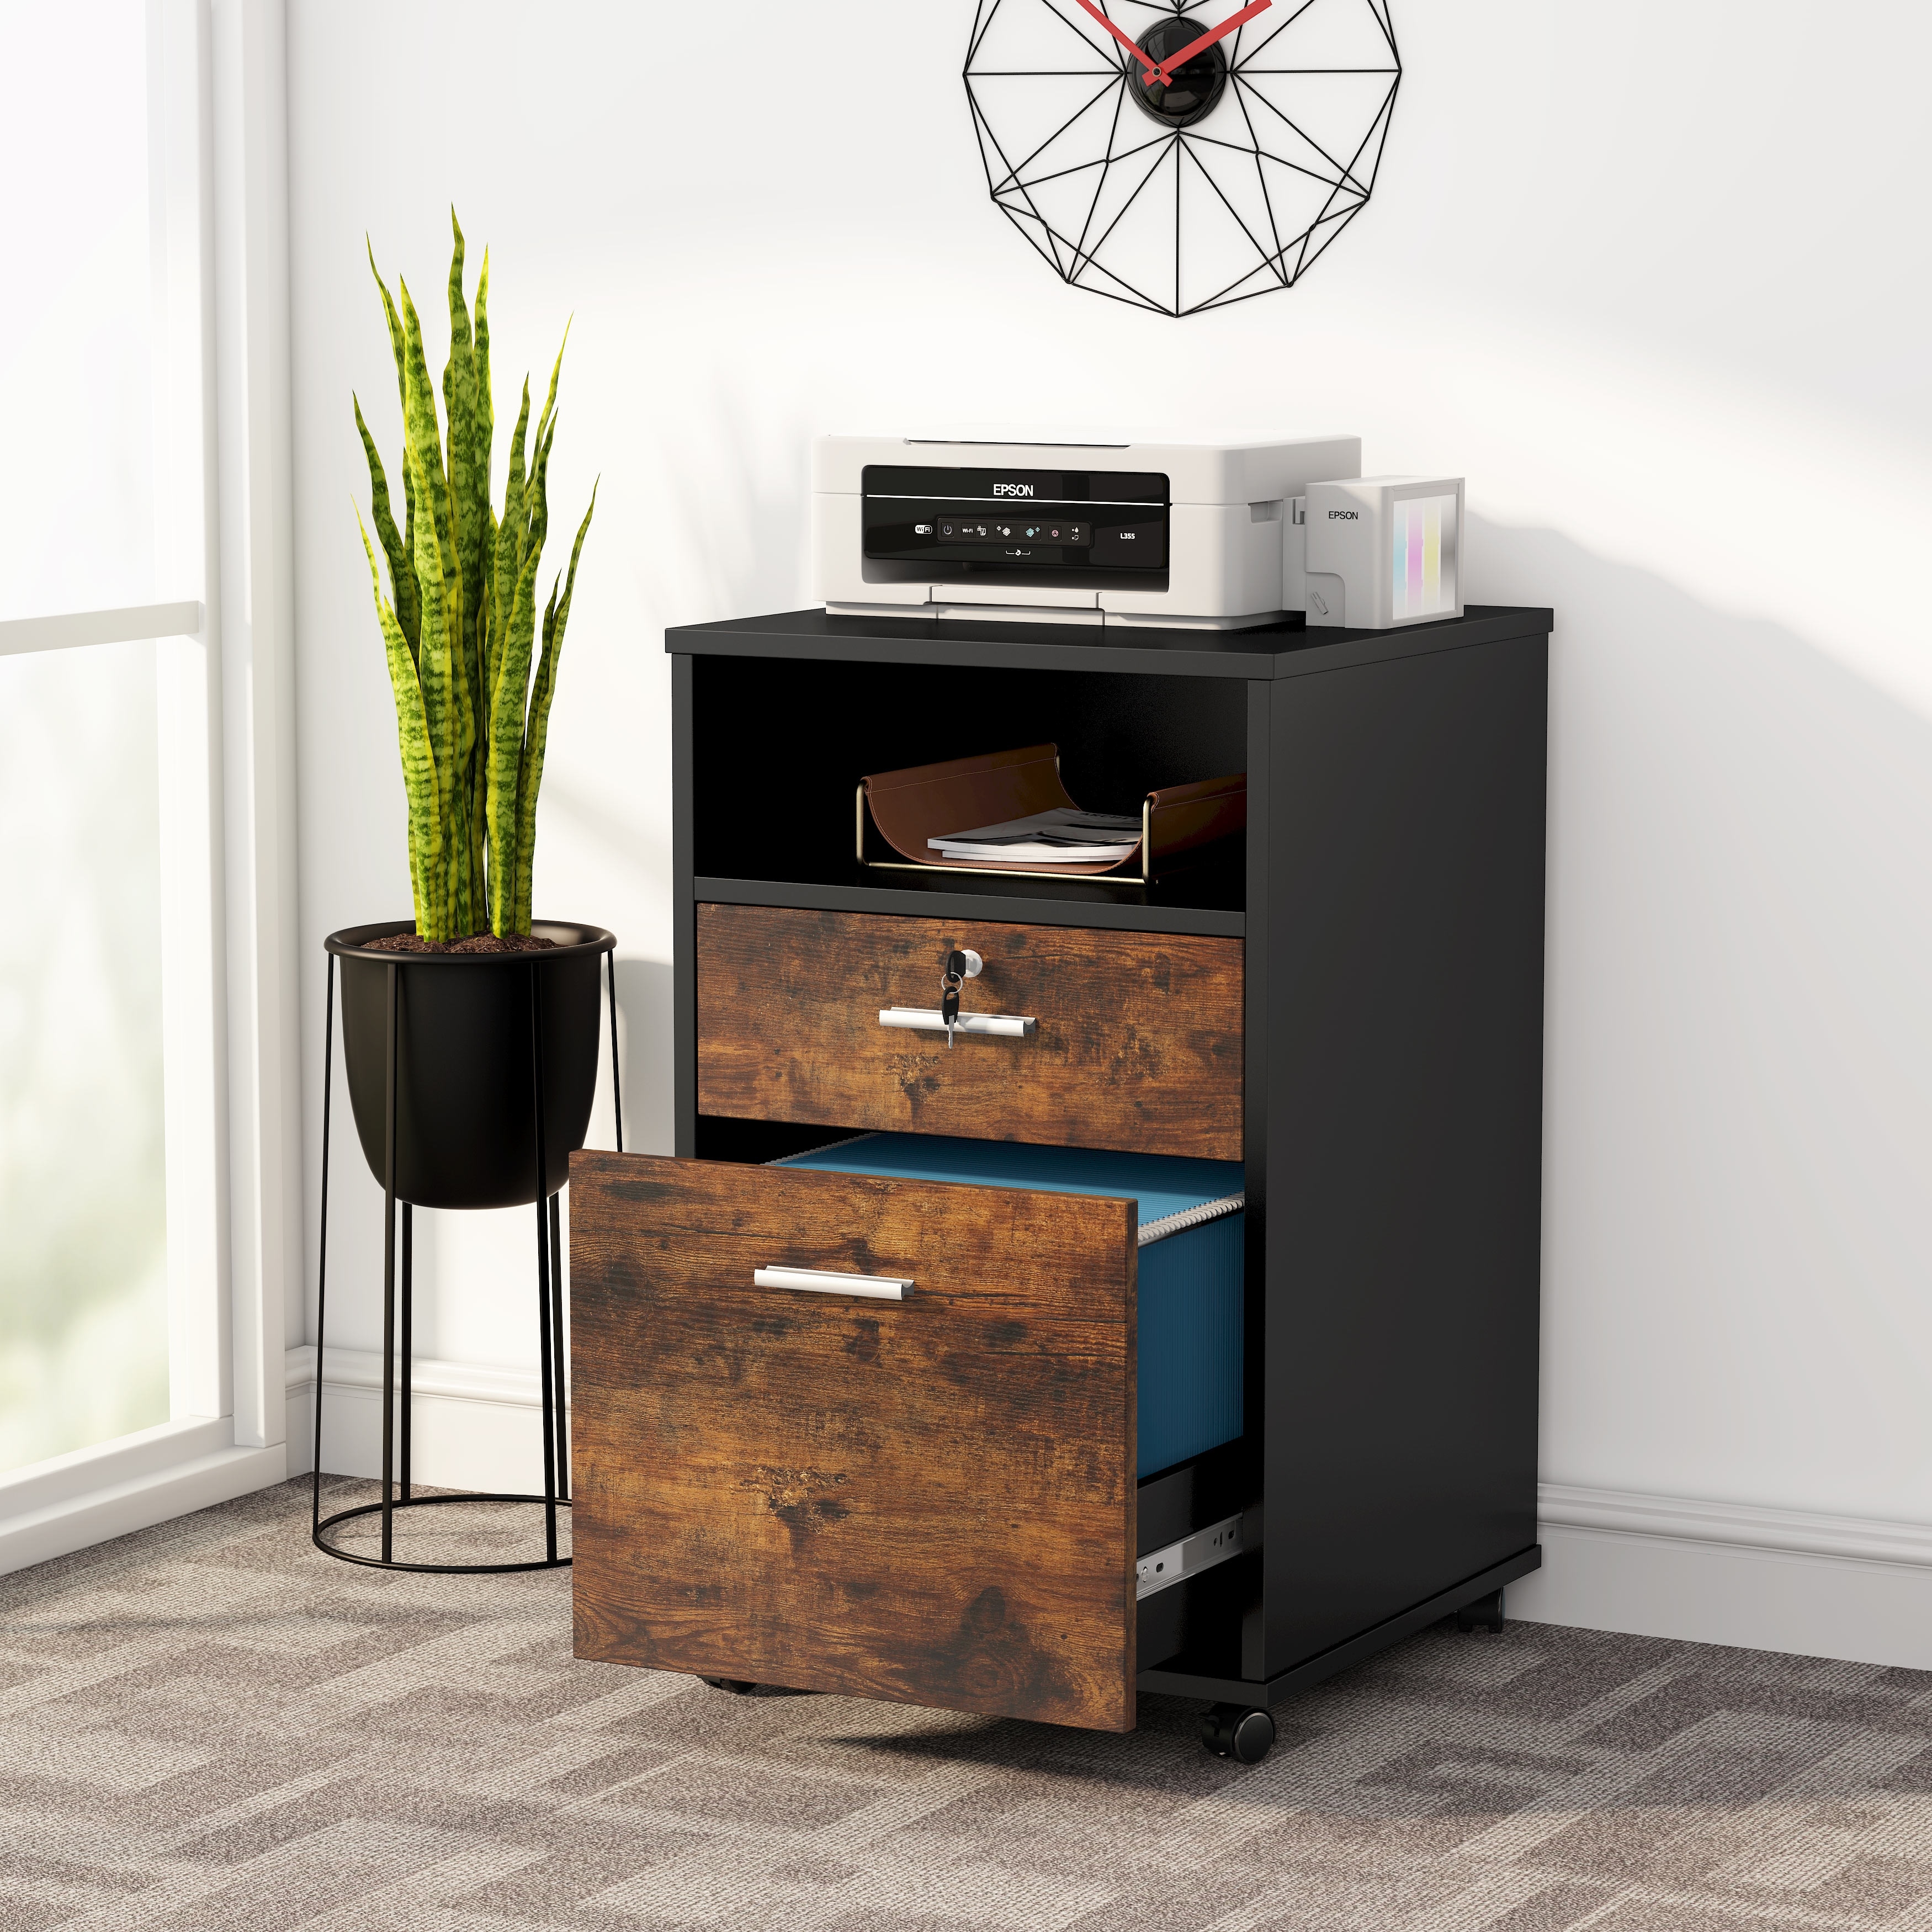 https://ak1.ostkcdn.com/images/products/is/images/direct/c78787f4cb6a7bfc55cbfa00c82cffe39448afd1/2-Drawer-Mobile-File-Cabinet-with-Lock%2C-Filing-Cabinet-for-Letter-Size%2C-Printer-Stand.jpg